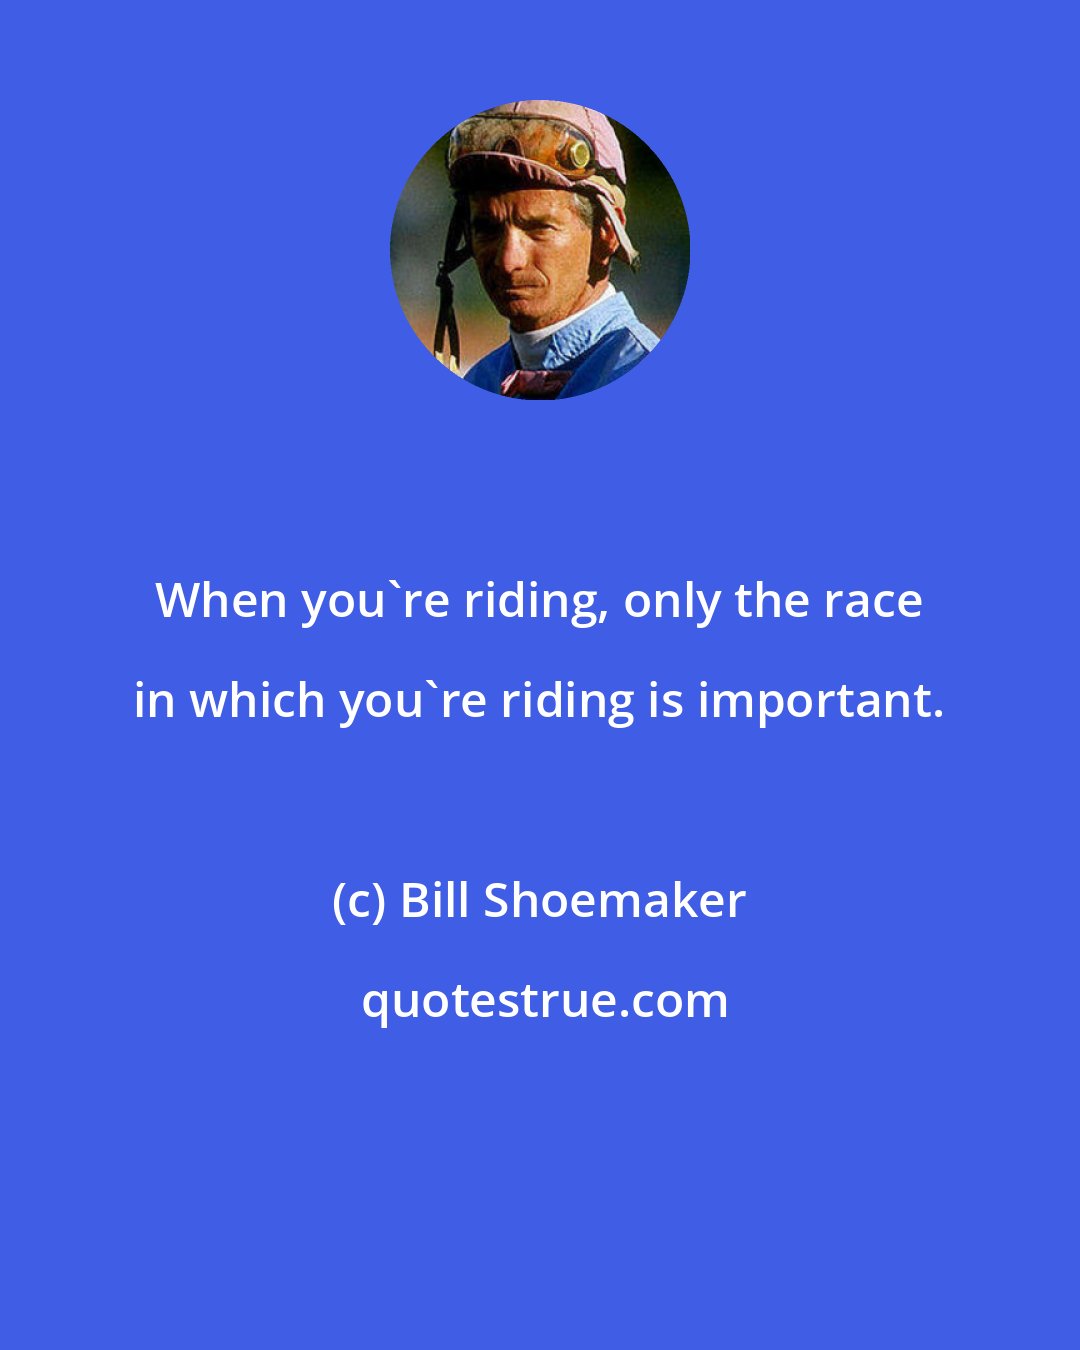 Bill Shoemaker: When you're riding, only the race in which you're riding is important.